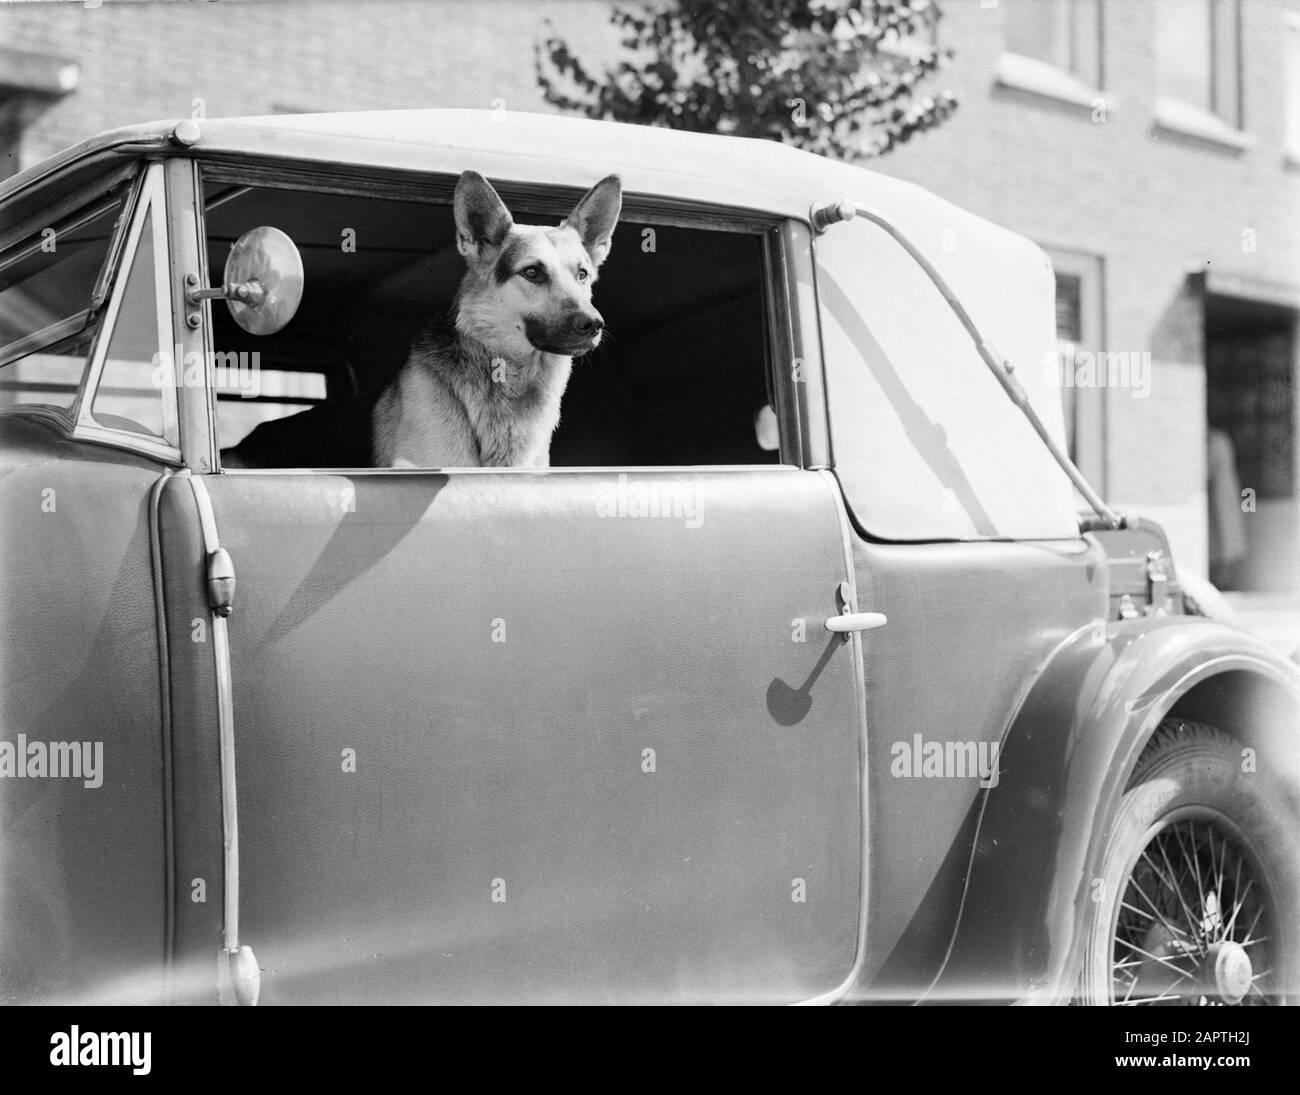 Shepherd dog Herta sits in the car and looks outside Date: 1934 Keywords: cars, dogs Stock Photo